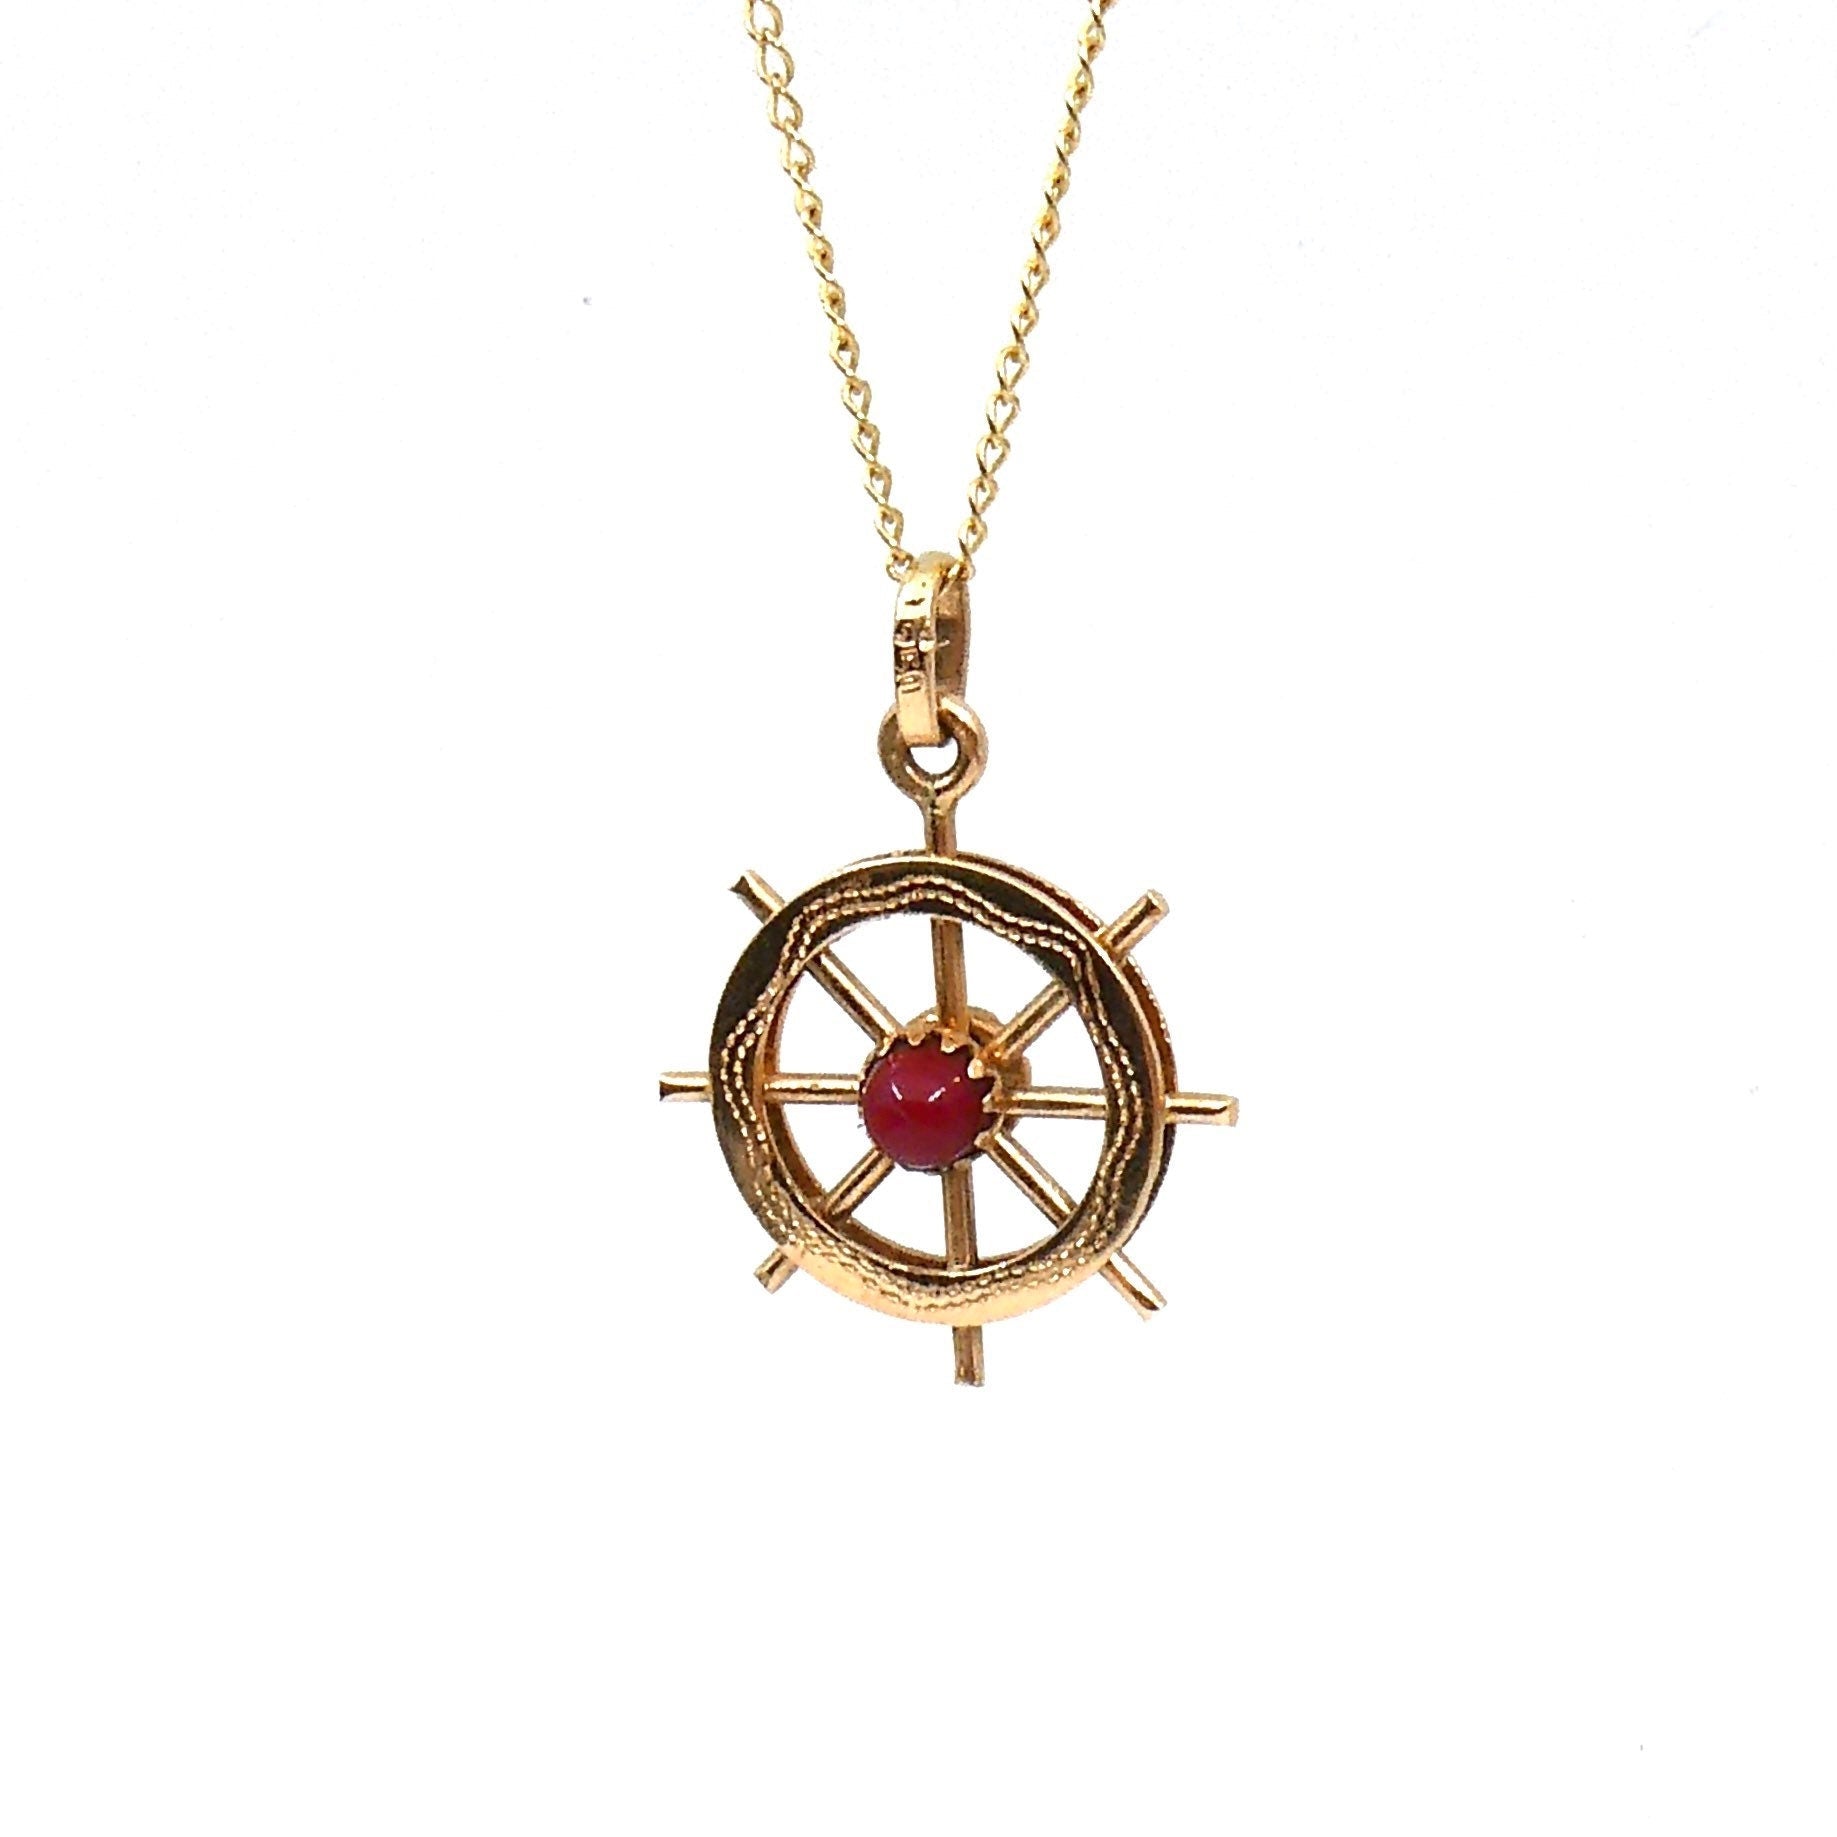 Vintage gold nautical pendant,  Ship's wheel 18kt gold pendant, sailor gift Collected